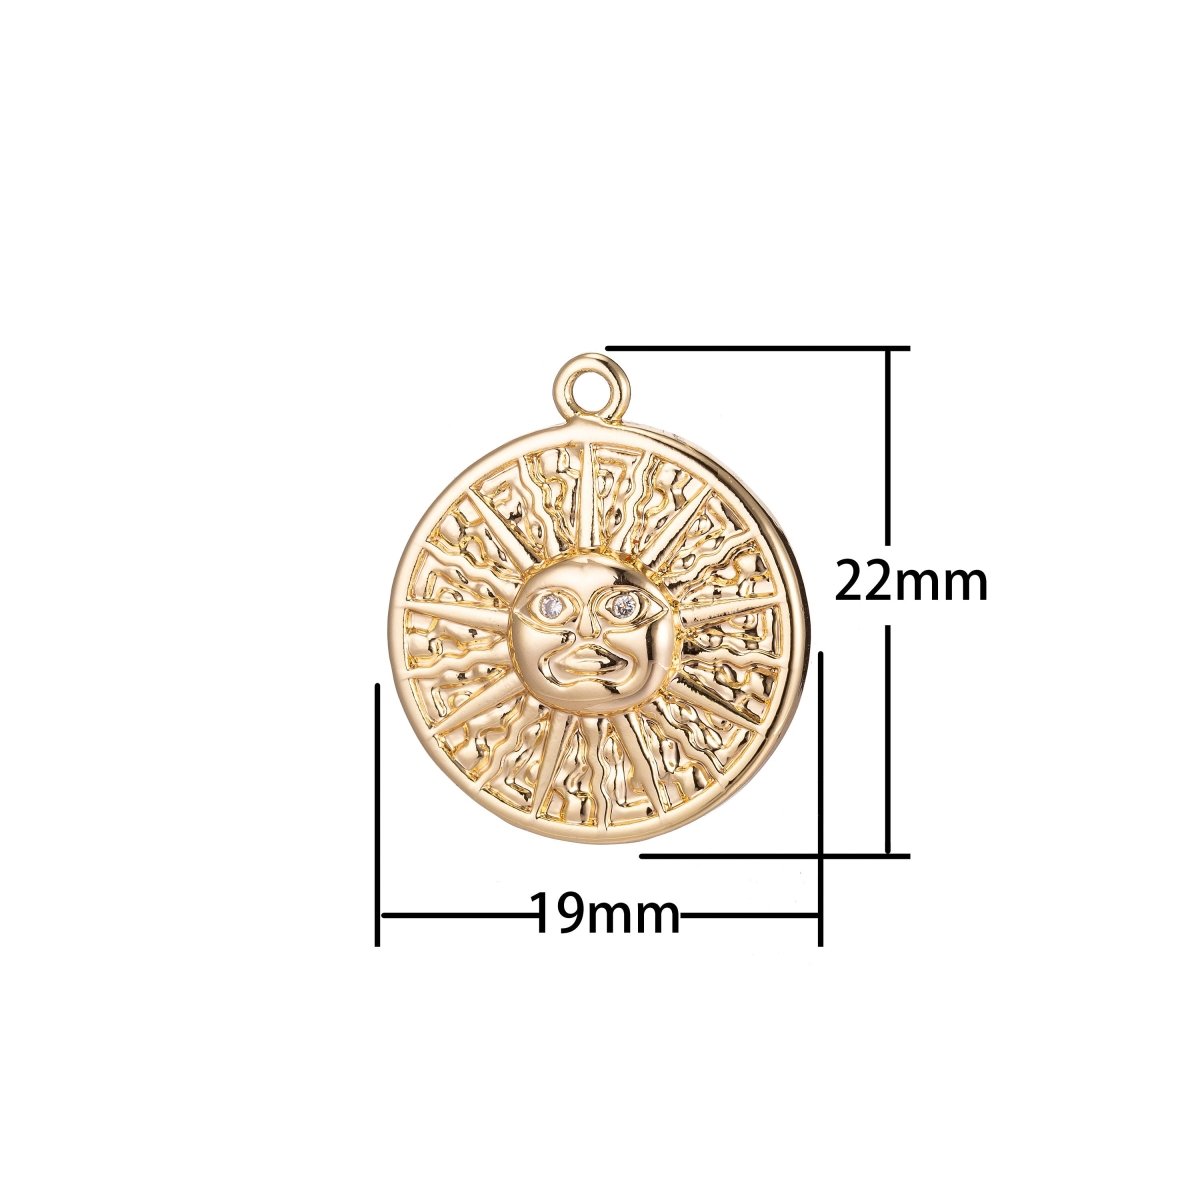 Dainty Golden Celestial Sun Charm, Micro Pave CZ Charm, 18K Gold Filled Pendant Star Coin Medallion Necklace Charm for Jewelry MakingC-351 - DLUXCA